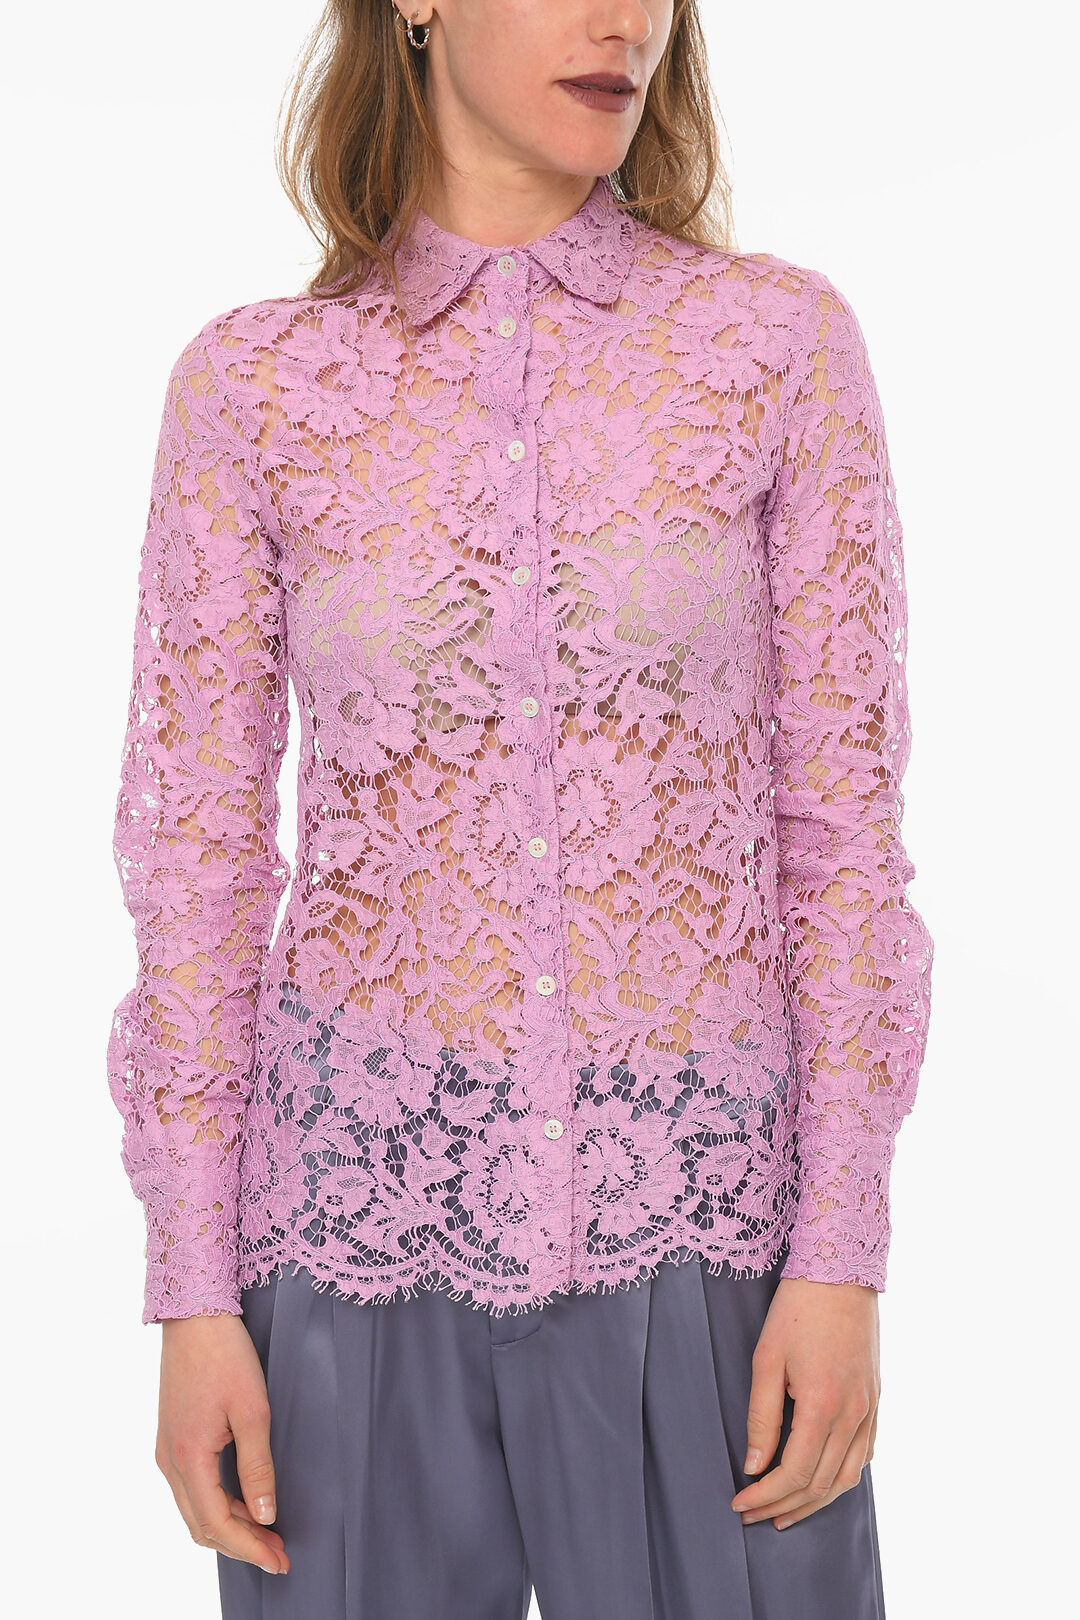 Super Blond Solid Color Lace Shirt women - Glamood Outlet